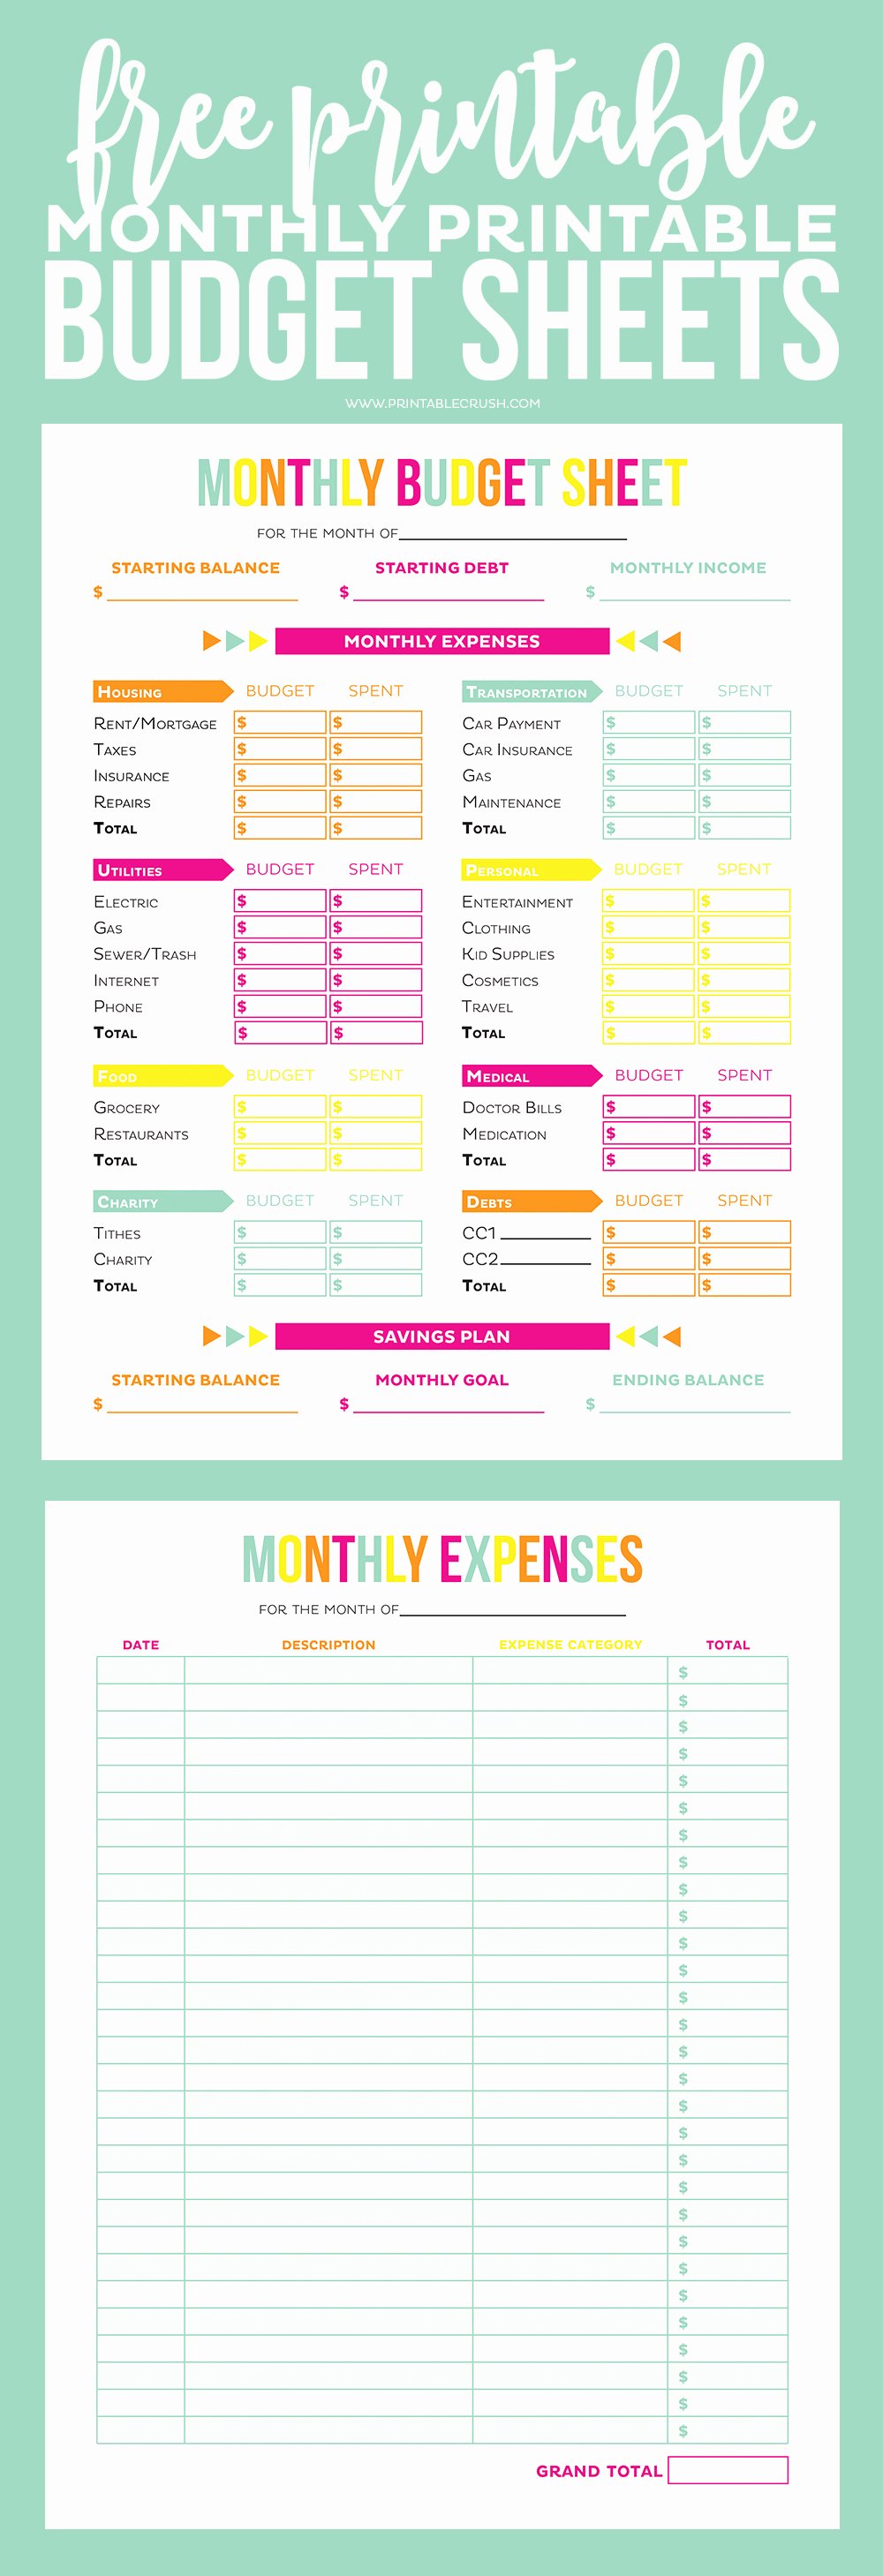 Monthly Budget Worksheet Printable Lovely Free Printable Bud Sheets Printable Crush